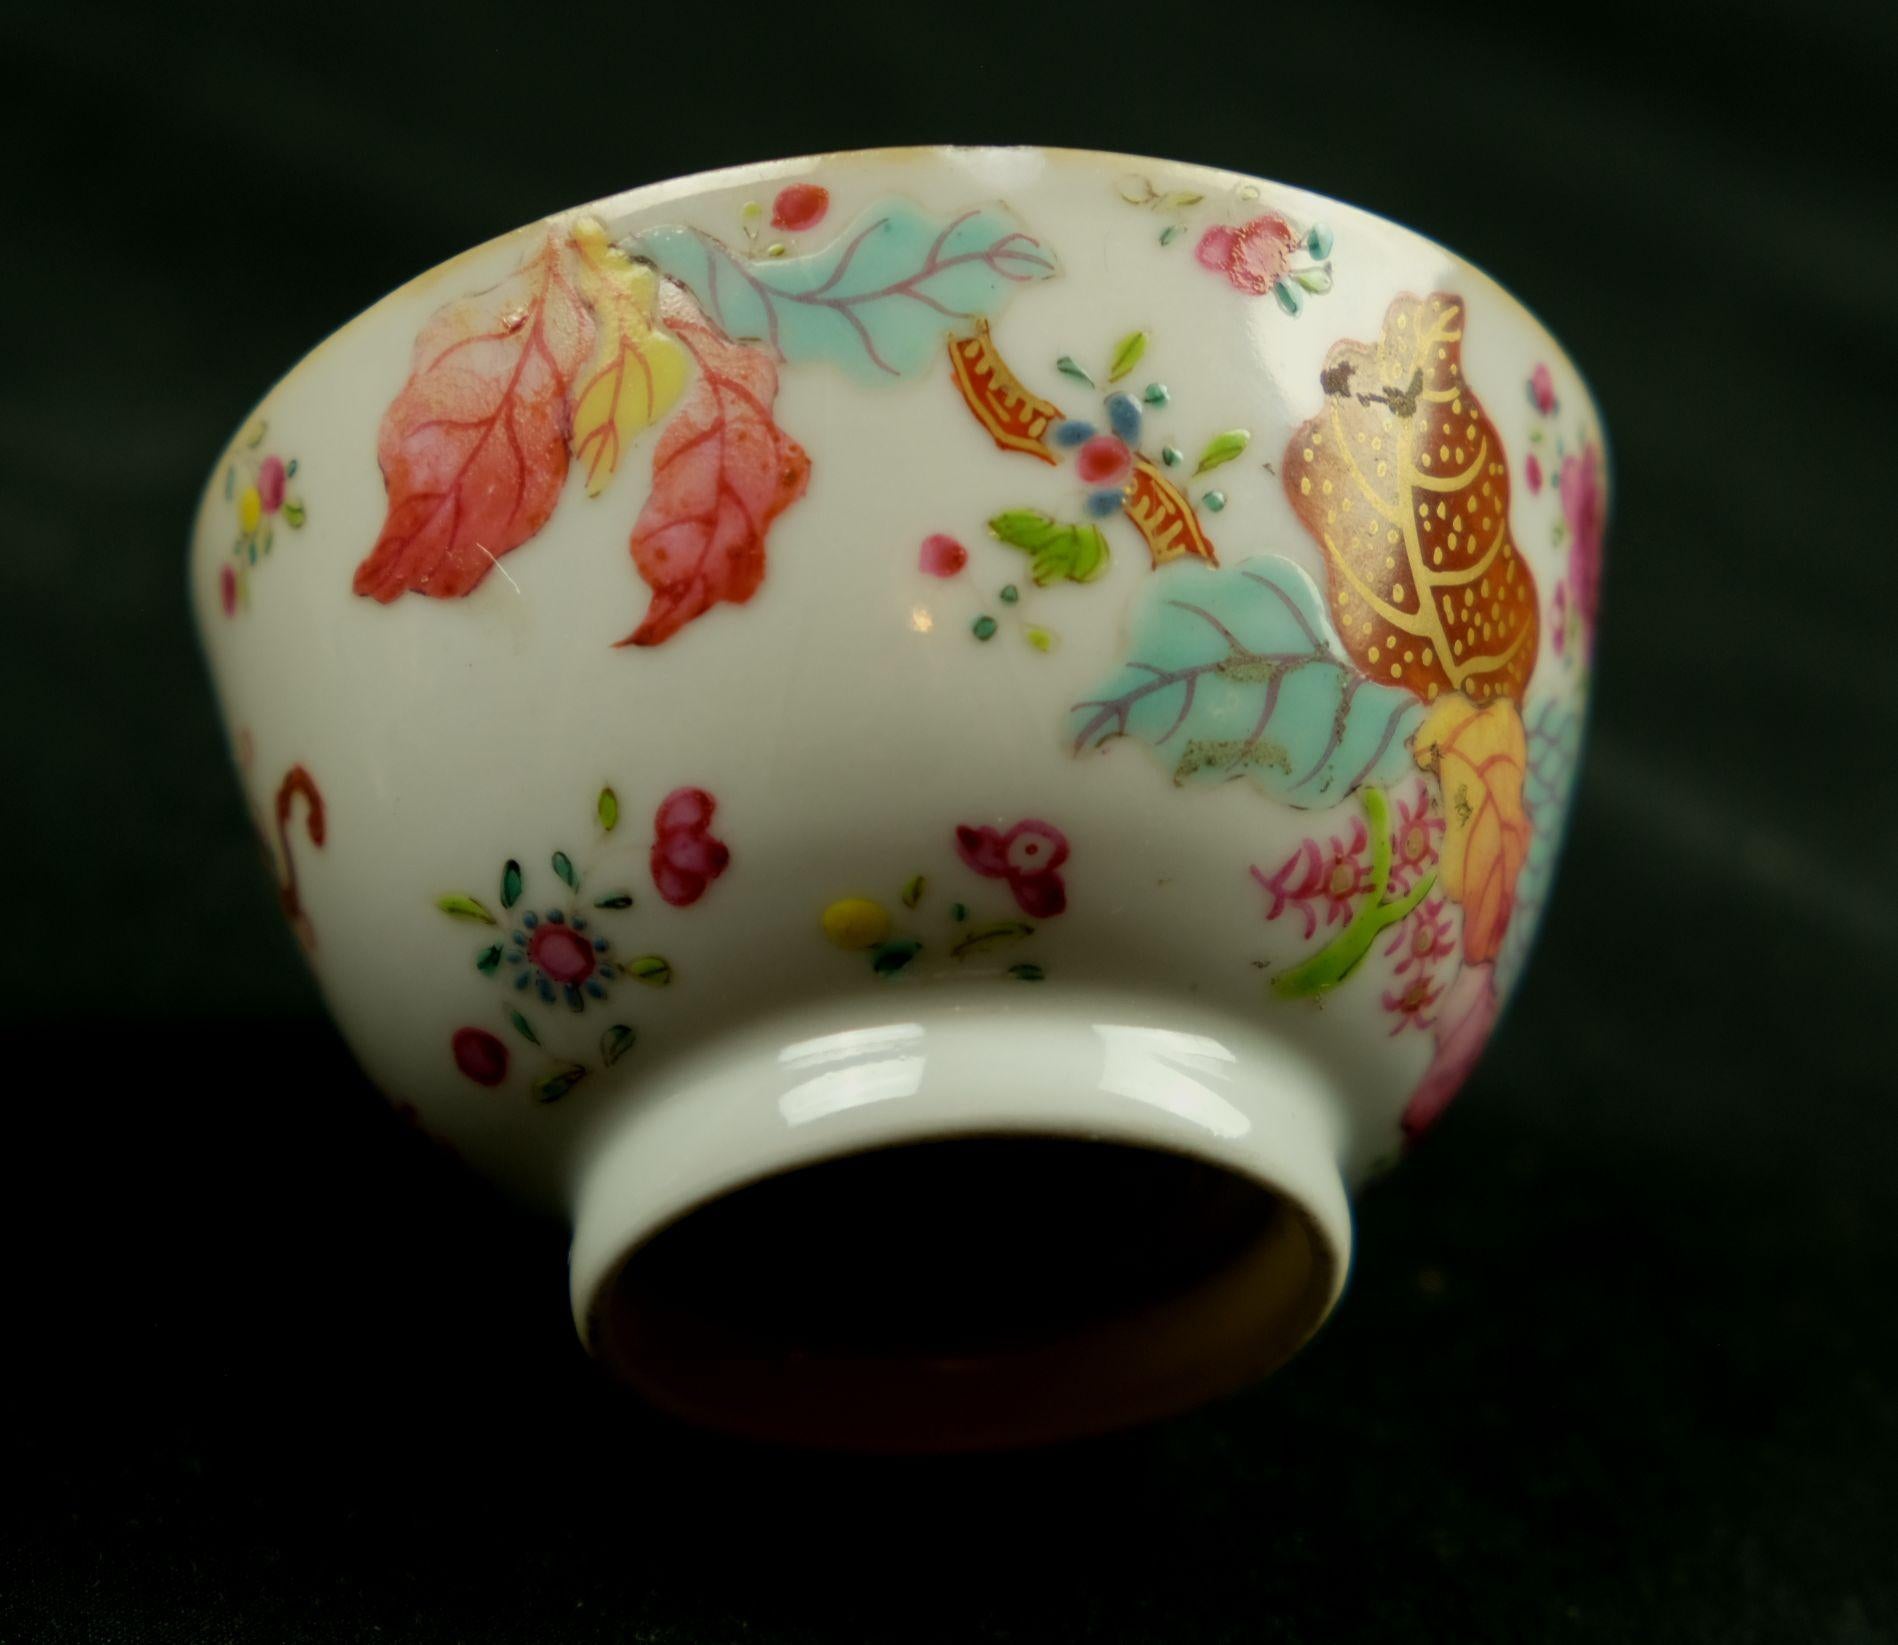 18th Century Antique Chinese Famille Rose Tobacco Leaf Tea Bawl Cup & Saucer Porcelain For Sale